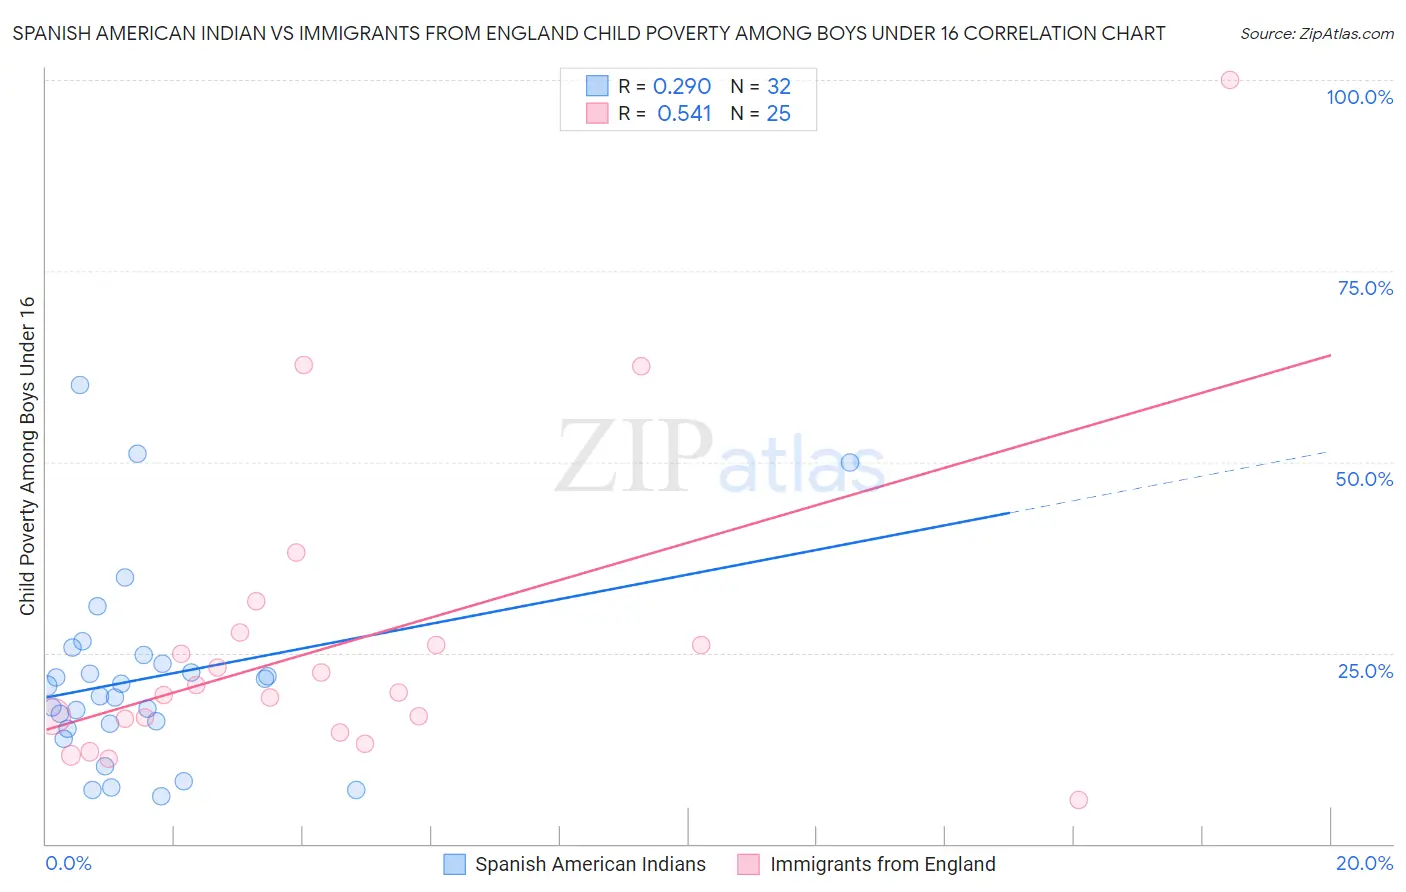 Spanish American Indian vs Immigrants from England Child Poverty Among Boys Under 16